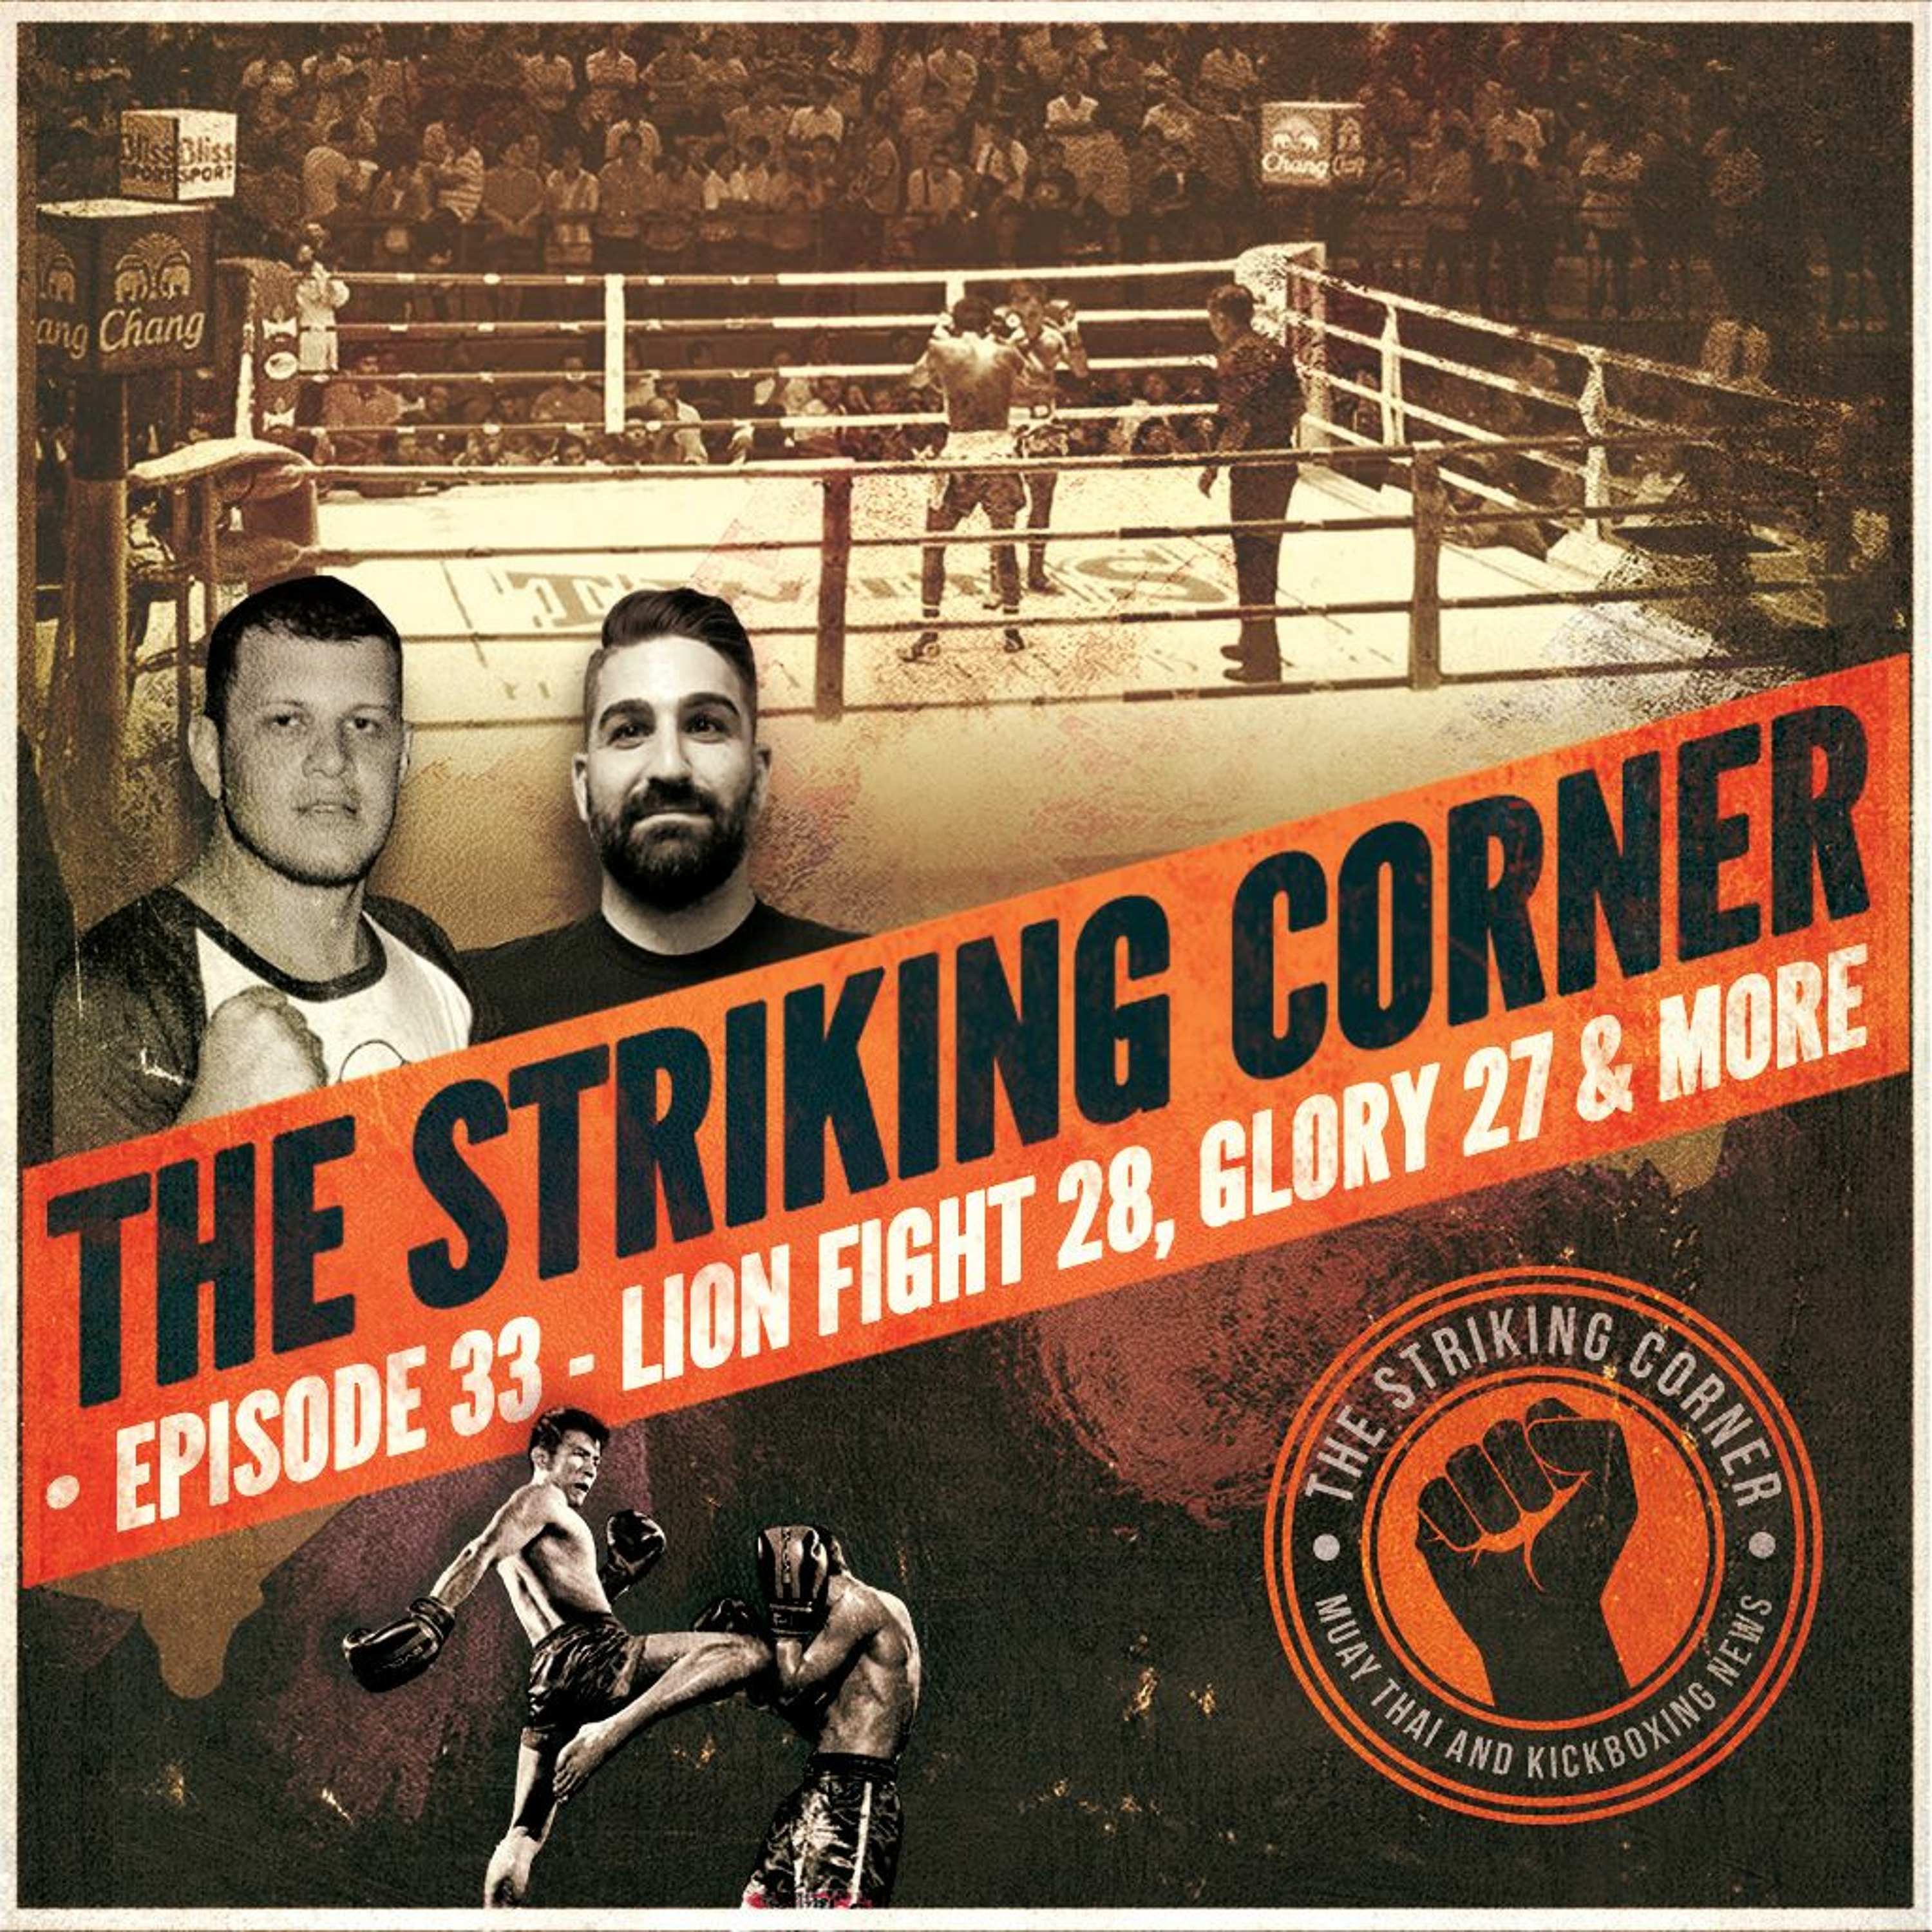 Ep. 33 - Lion Fight 28, Glory 27 & More